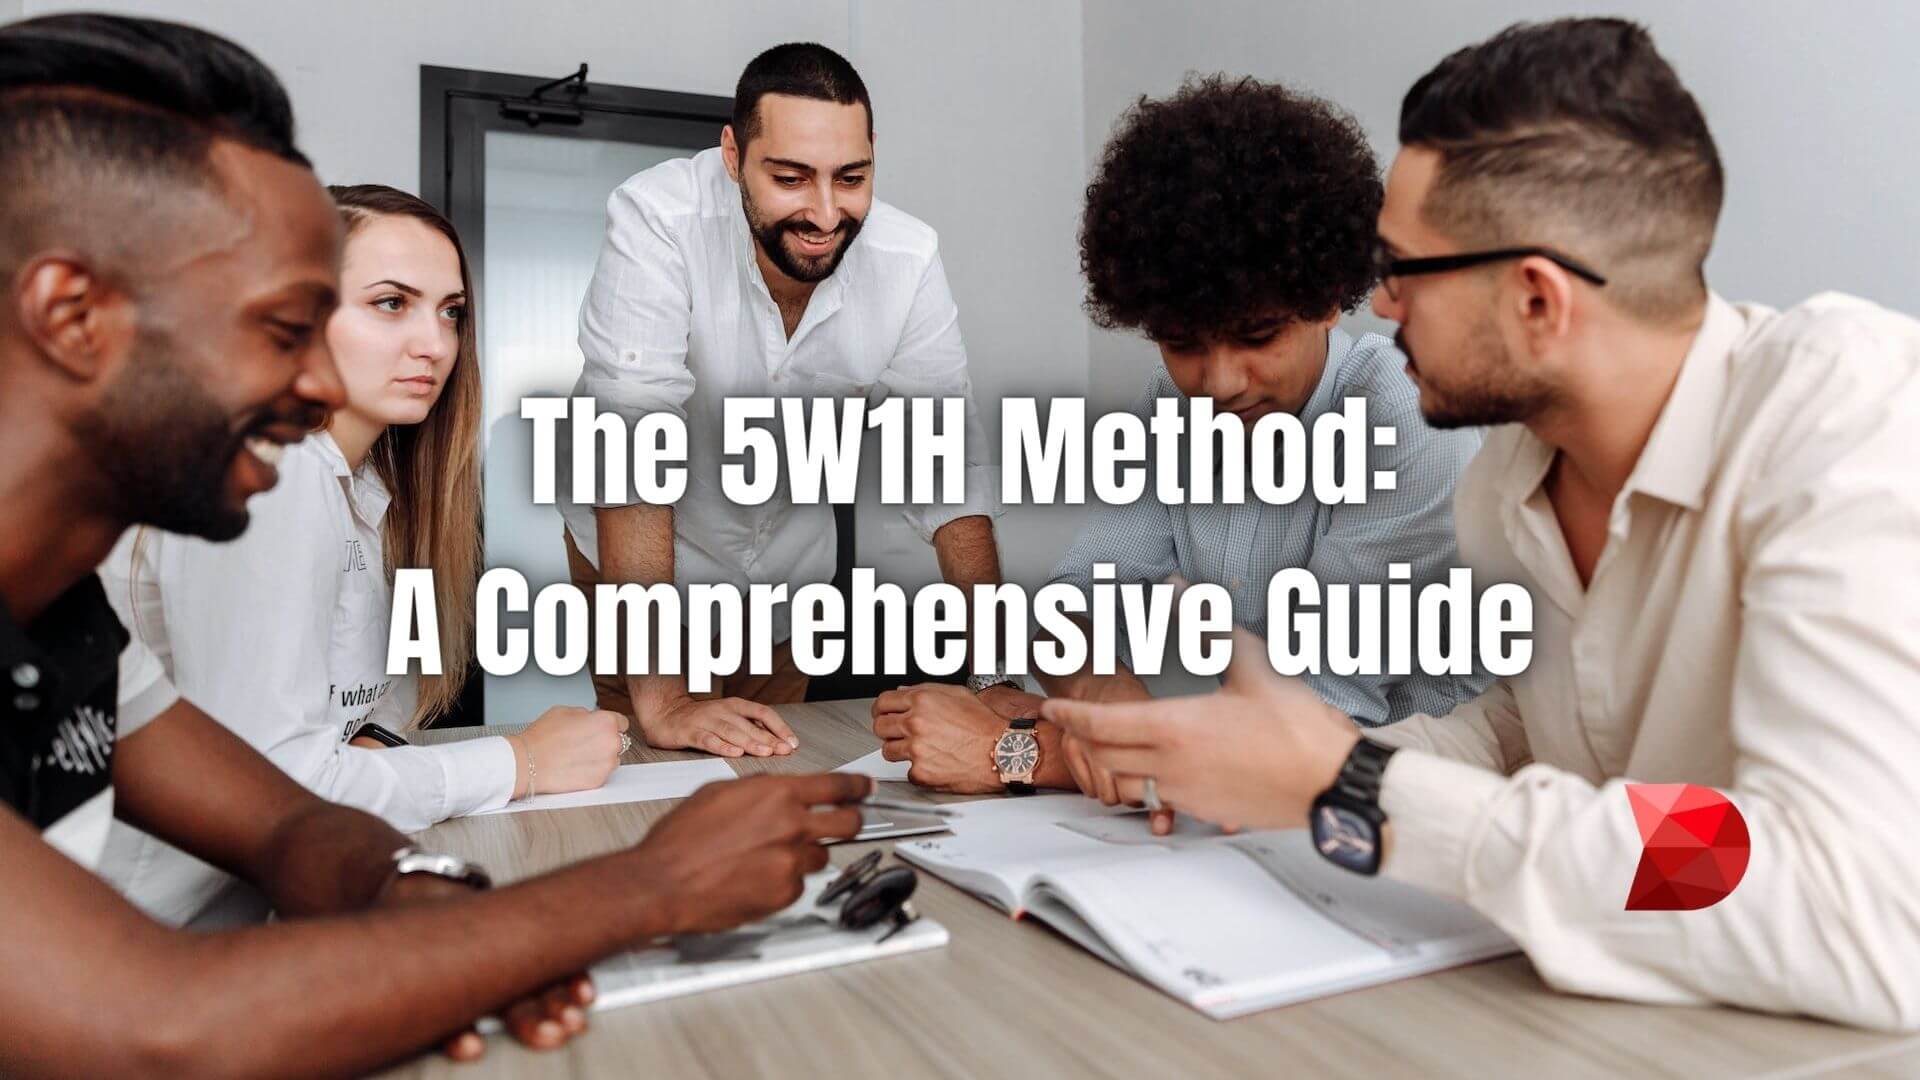 Unlock effective decision-making using the 5W1H method. Click here to learn more about Who, What, Where, When, Why, and How with this guide.